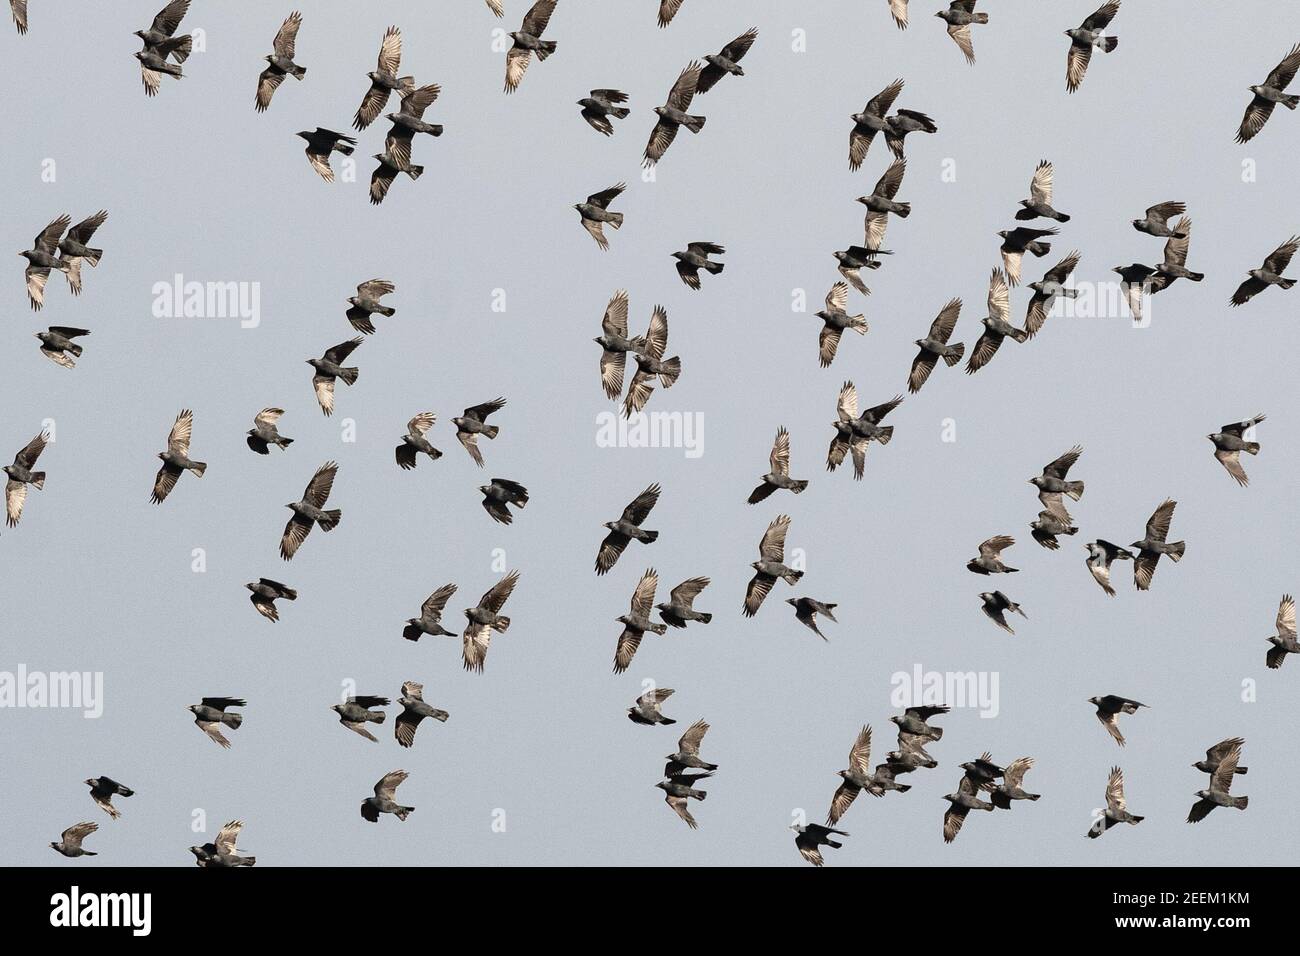 Killearn, Stirling, Scotland, UK. 16th Feb, 2021. UK weather - part of a large flock or chattering of Jackdaws noisily tumbling and wind surfing, seemingly enjoying playing in the wind on a day of sunshine and showers Credit: Kay Roxby/Alamy Live News Stock Photo